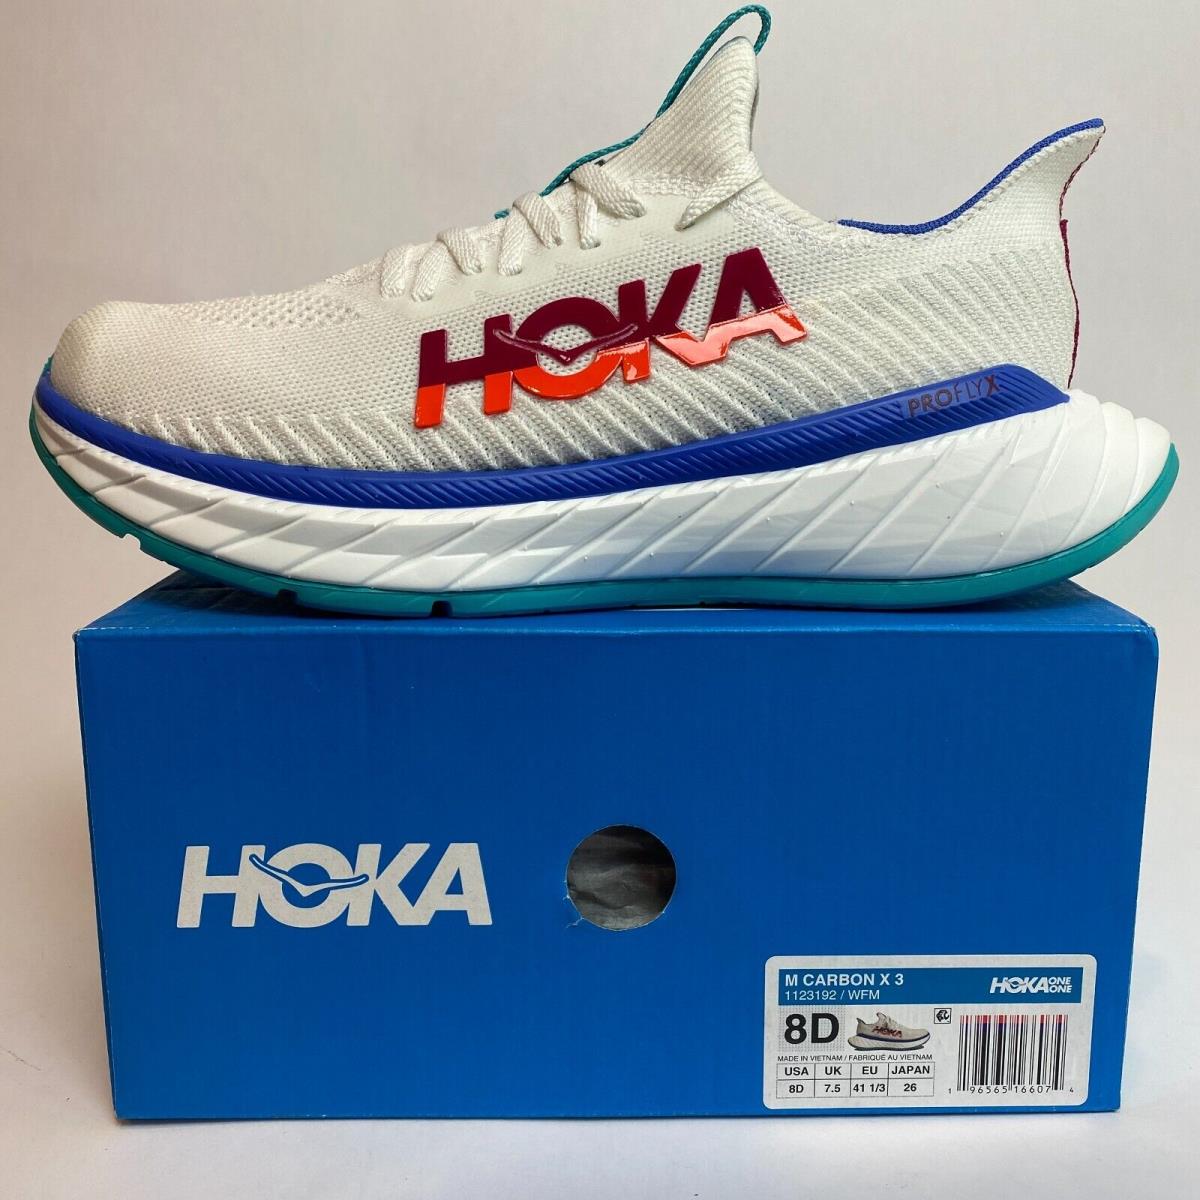 Hoka One One Men`s Carbon X 3 Running Sneaker Shoes Size 8 D M US